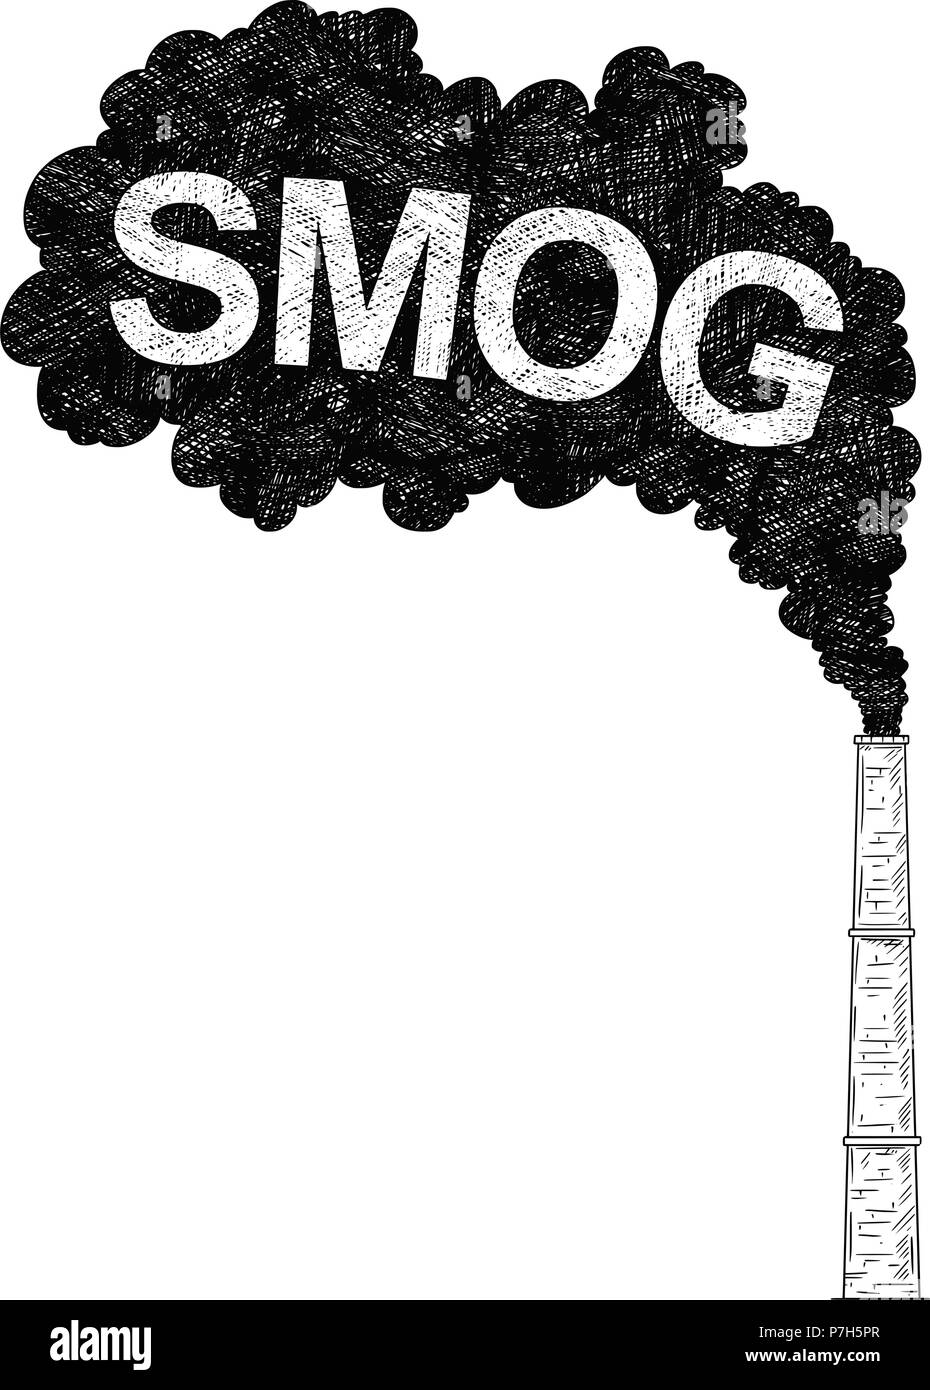 Vector Artistic Drawing Illustration of Smokestack, Industry or Factory Air Smog Pollution Stock Vector